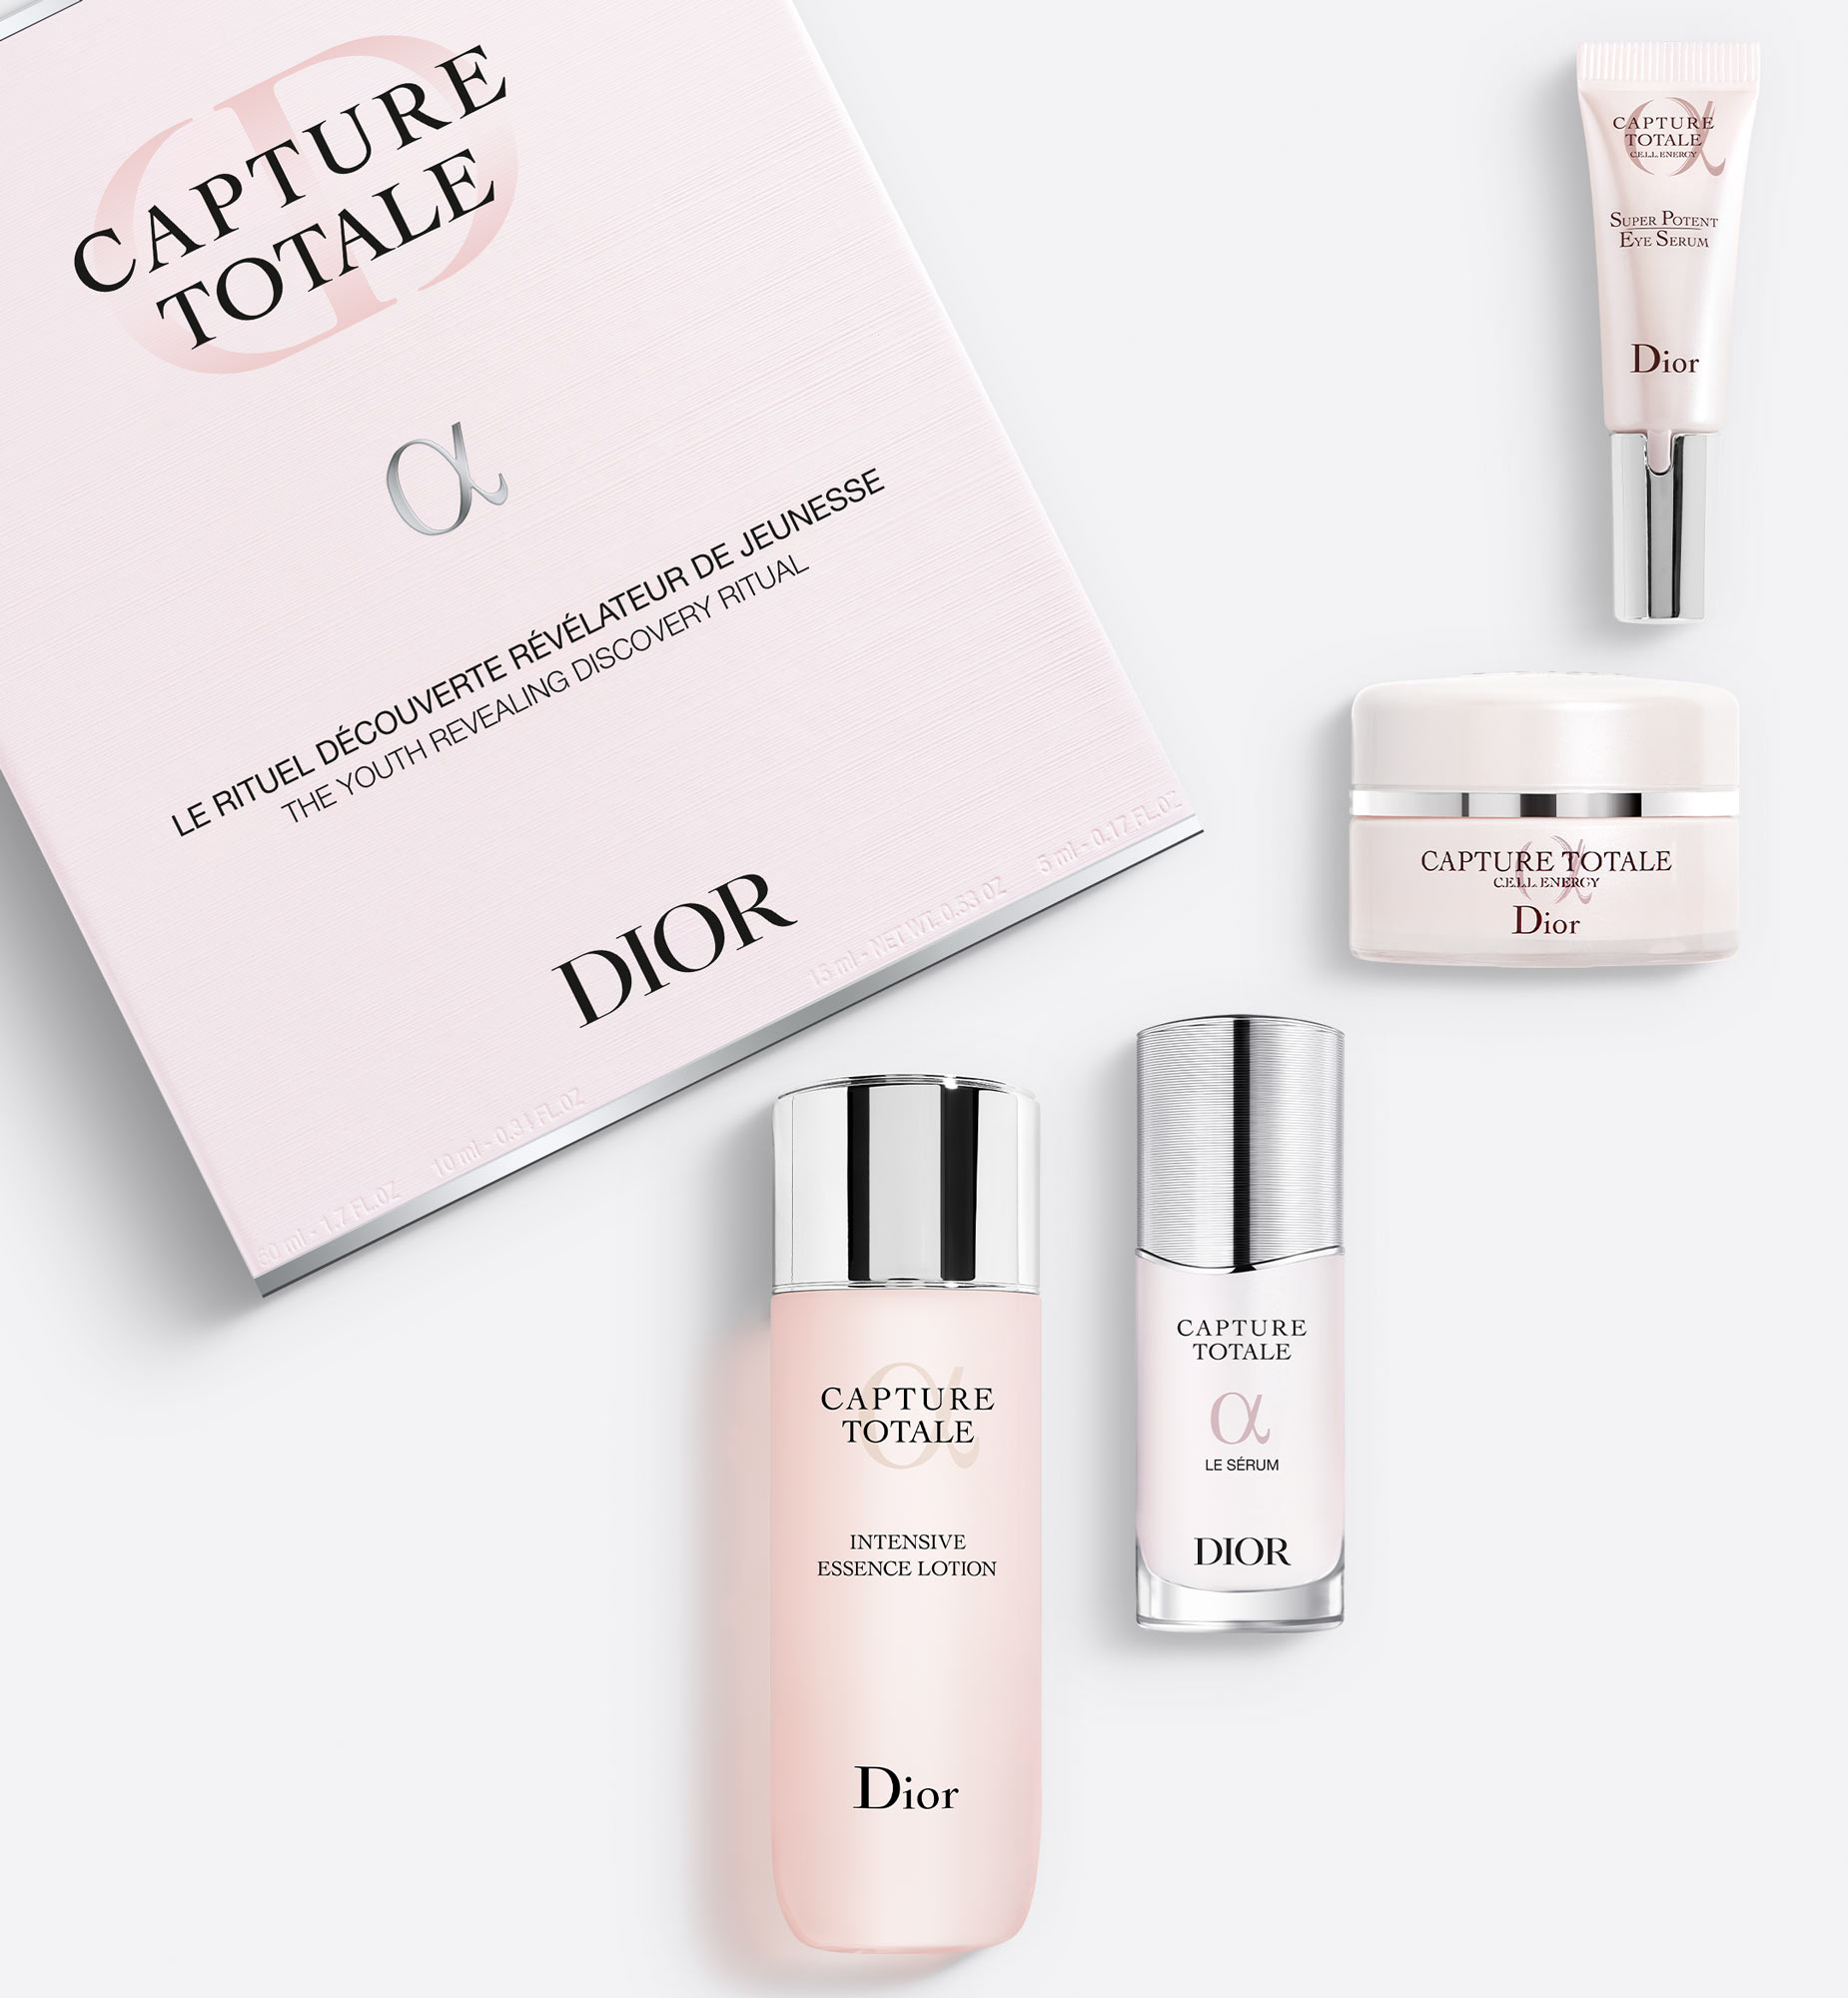 Give Capture Totale 4-Step Skincare Set - Holiday Gift Idea